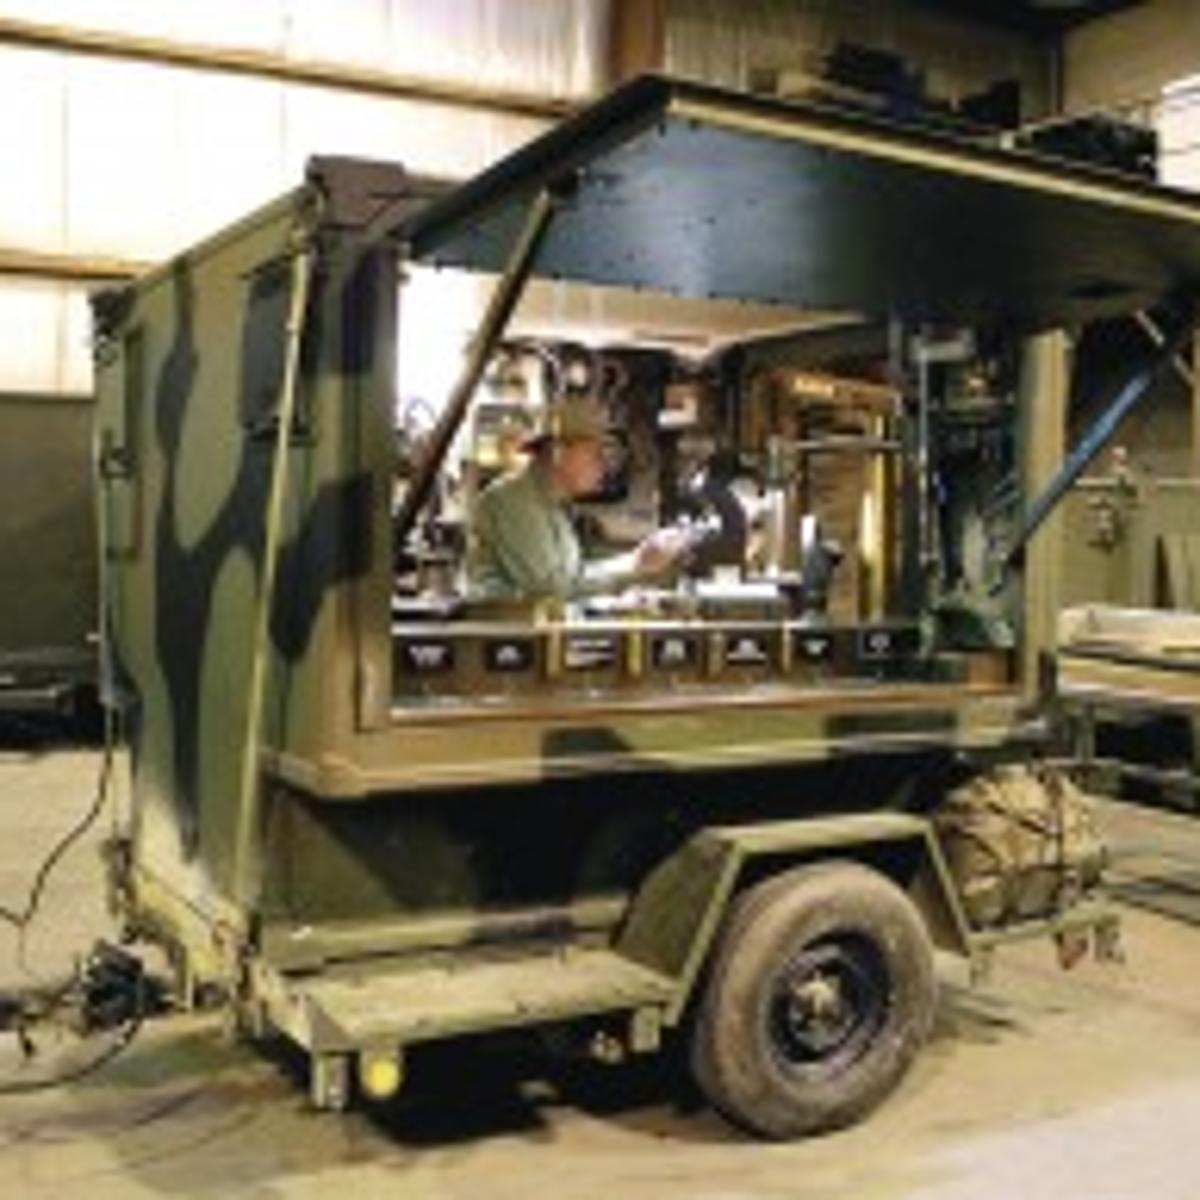 Vet Turns Military Surplus Into Dog Tag Making Vehicle Local